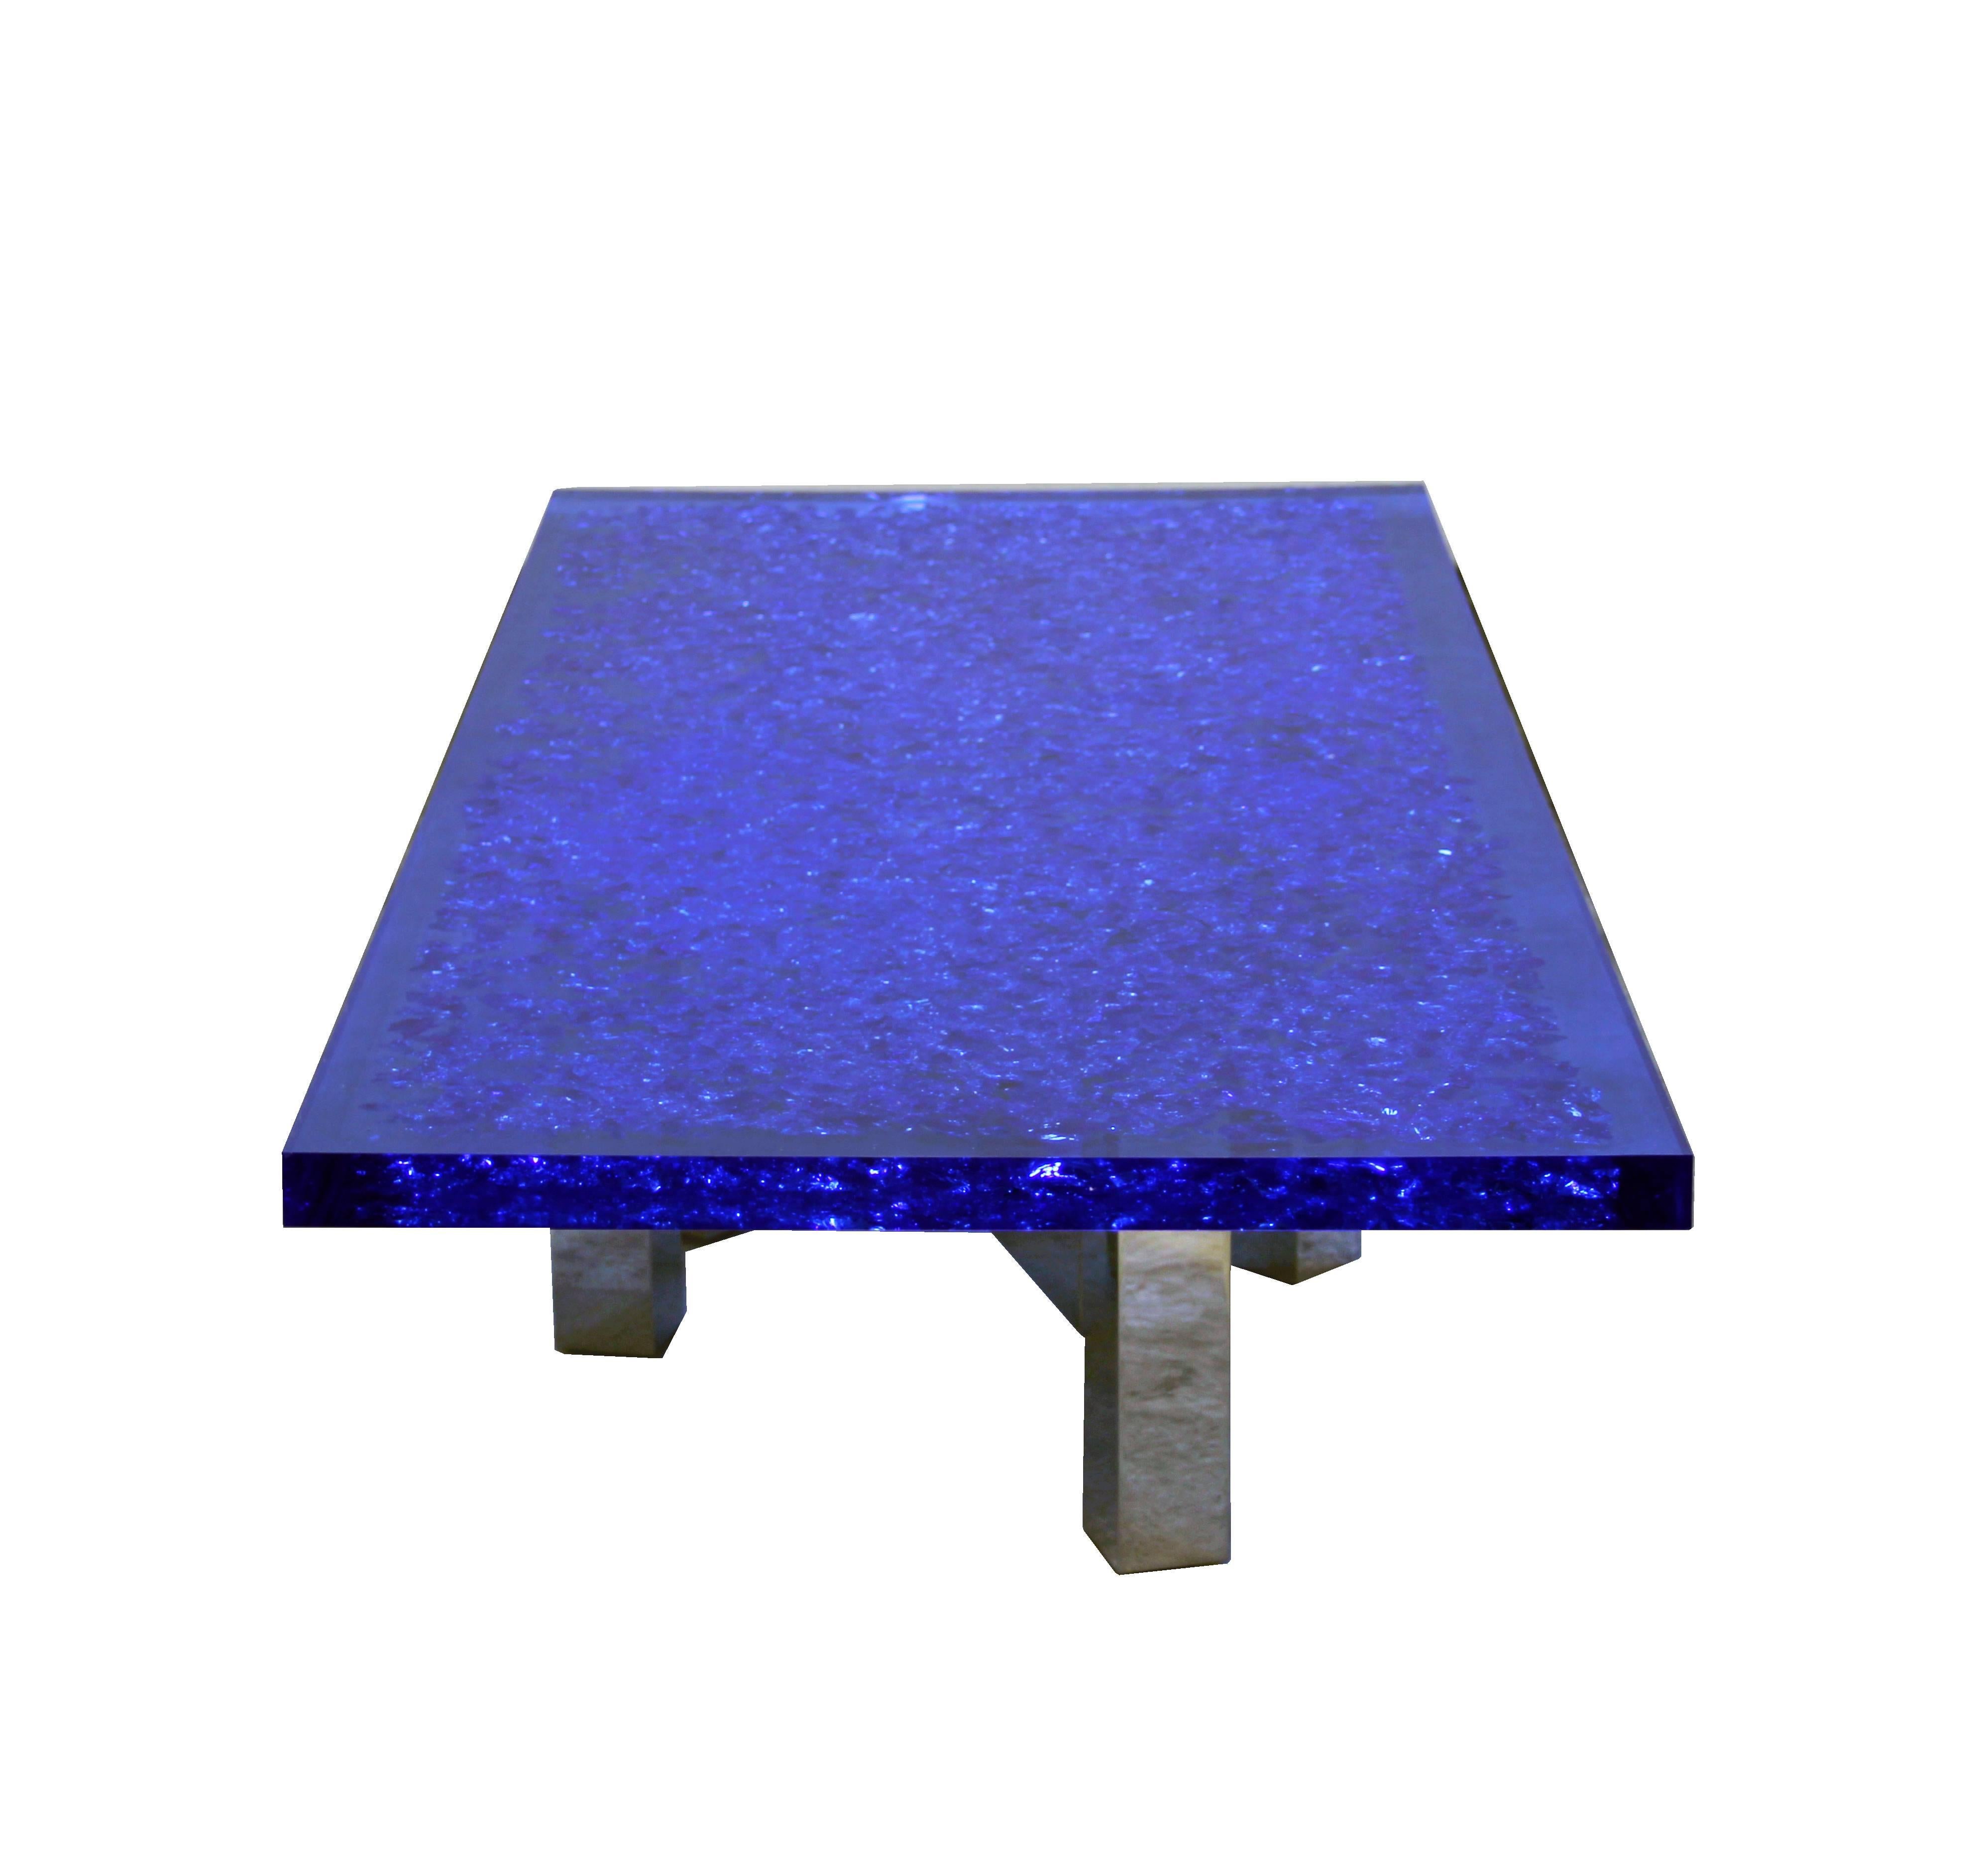 Light blue Murano glass and Lucite coffee table with nickel-plated brass base.
The colorful top in blue Lucite is plenty of suspended glass fragments.
The geometrical metal base is in brass with nickel finish.
Designed by Umberto Cinelli and